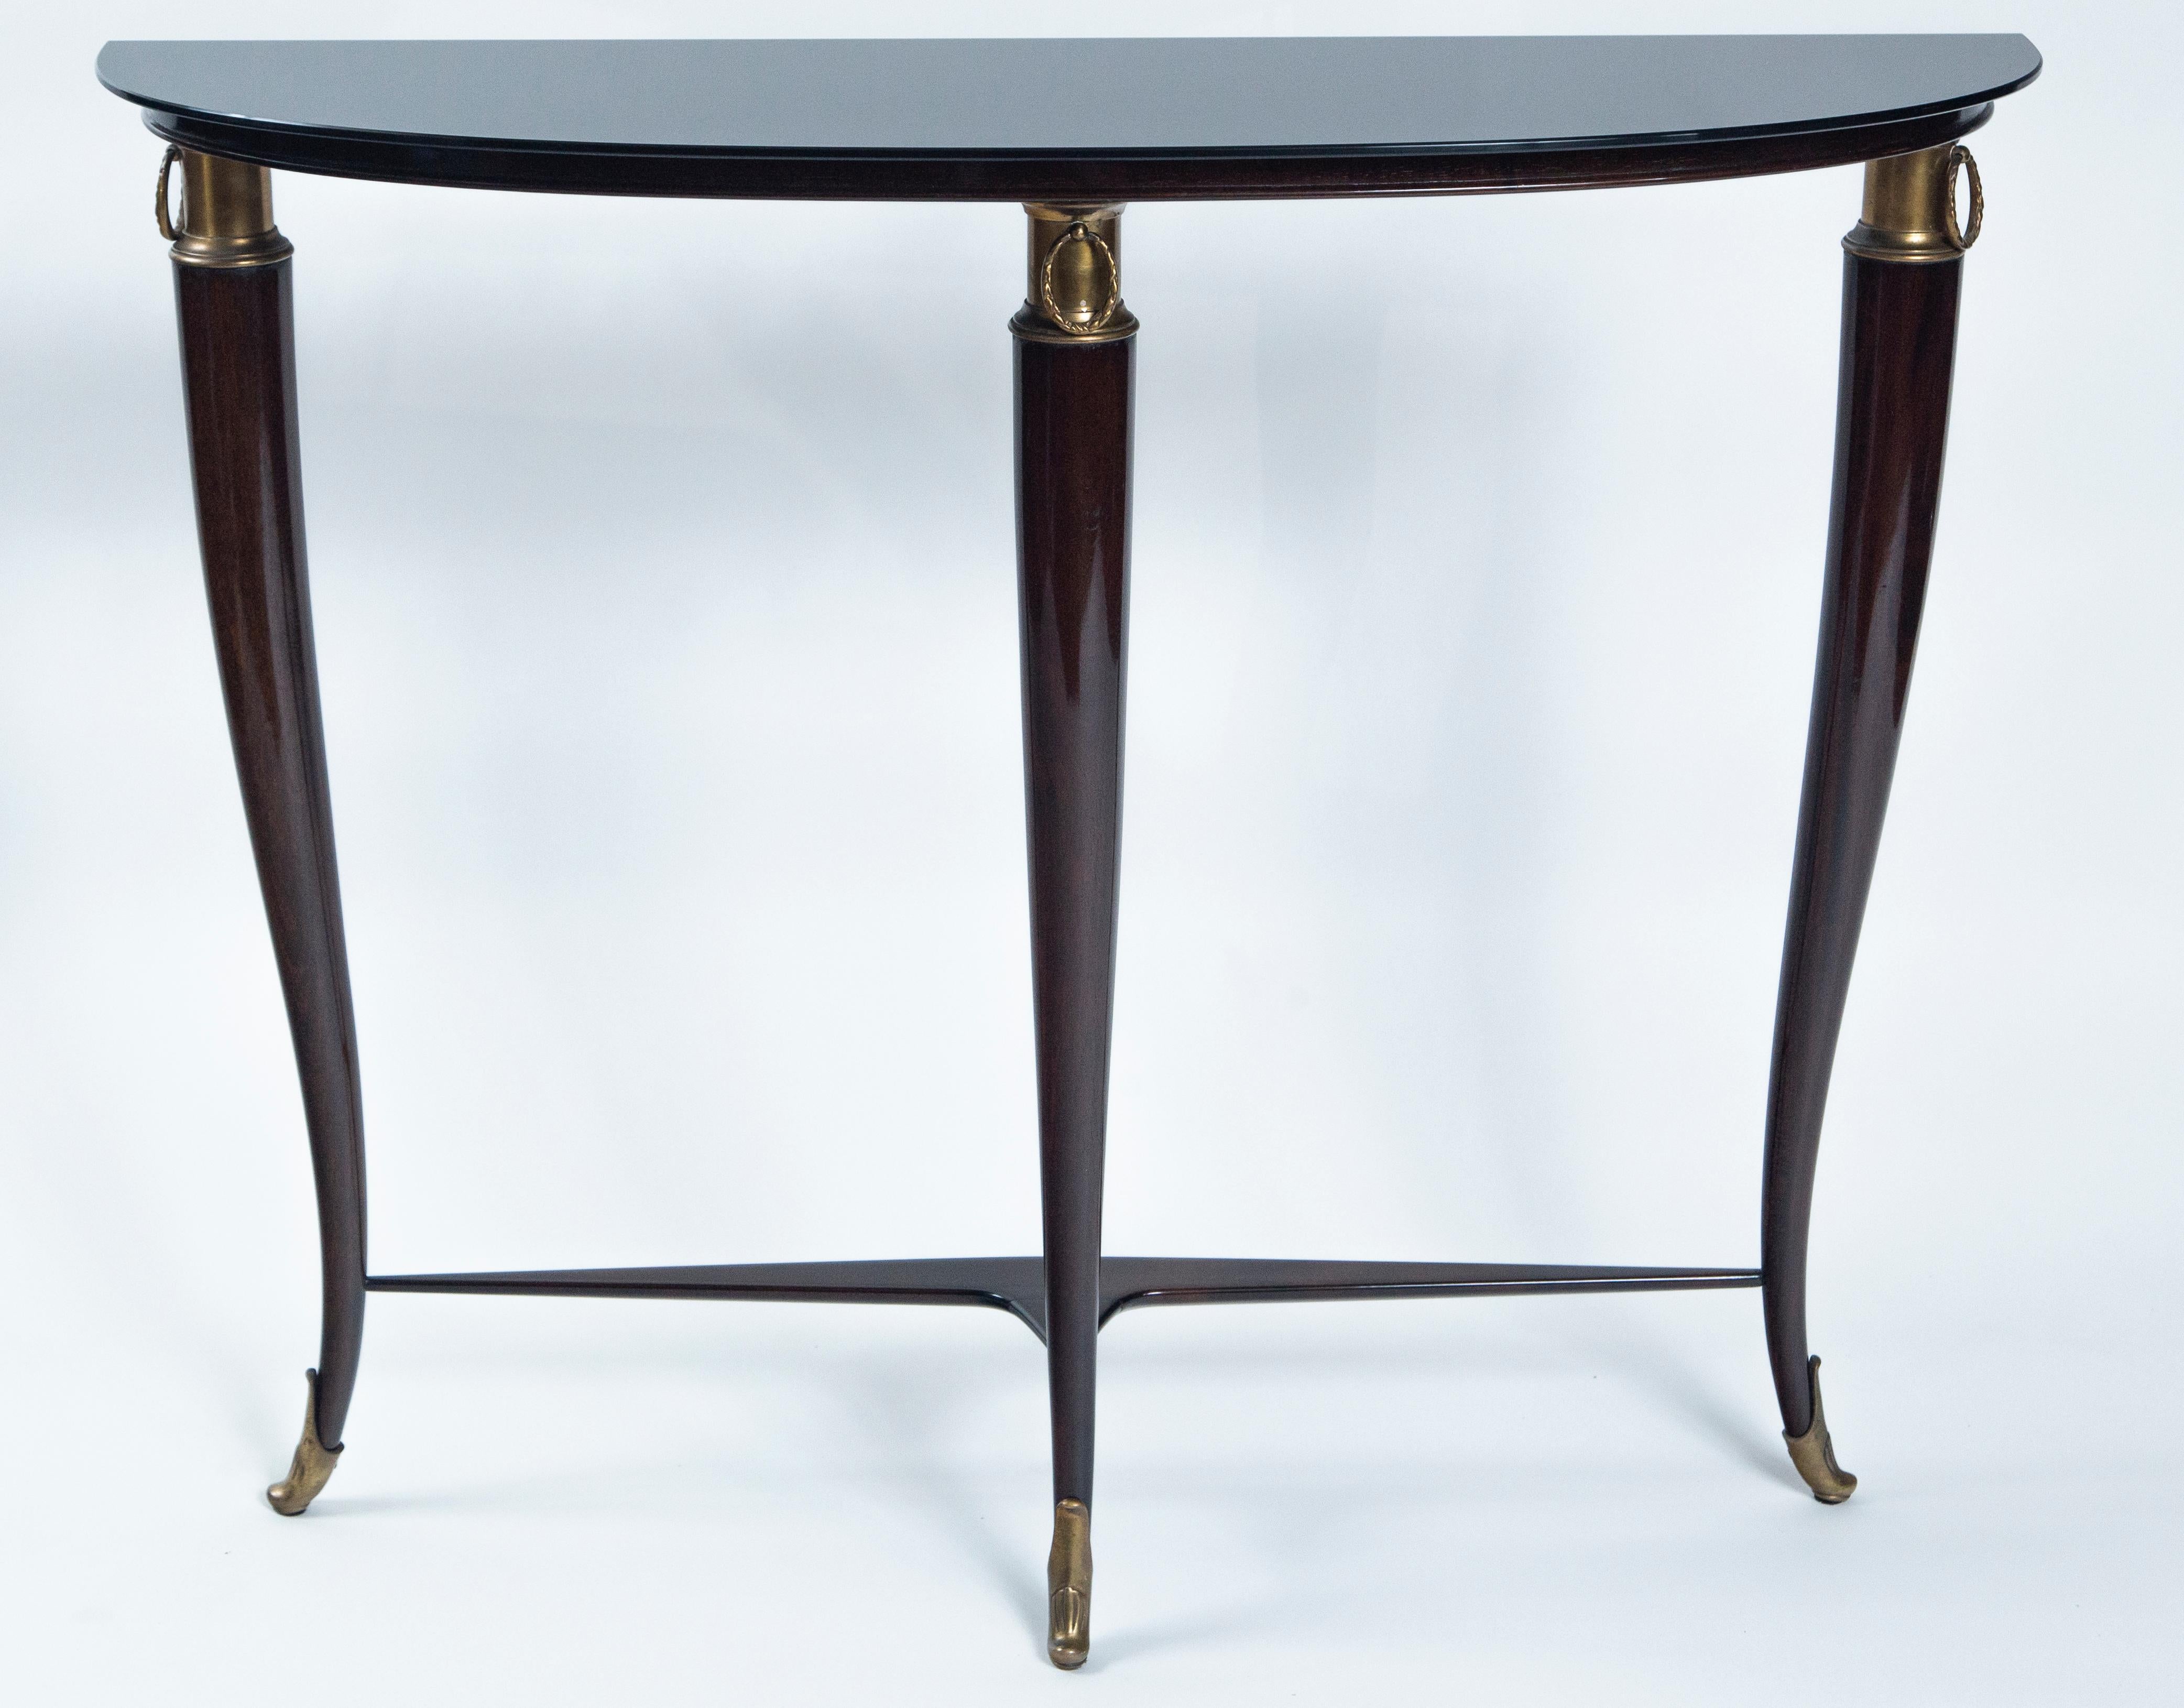 Fabulous demilune shaped console table with new black glass top over a solid mahogany base with brass ring fittings and sabots by Paola Buffa
free standing but necessary to attach to the wall for proper stability
Date: circa 1940
Origin: